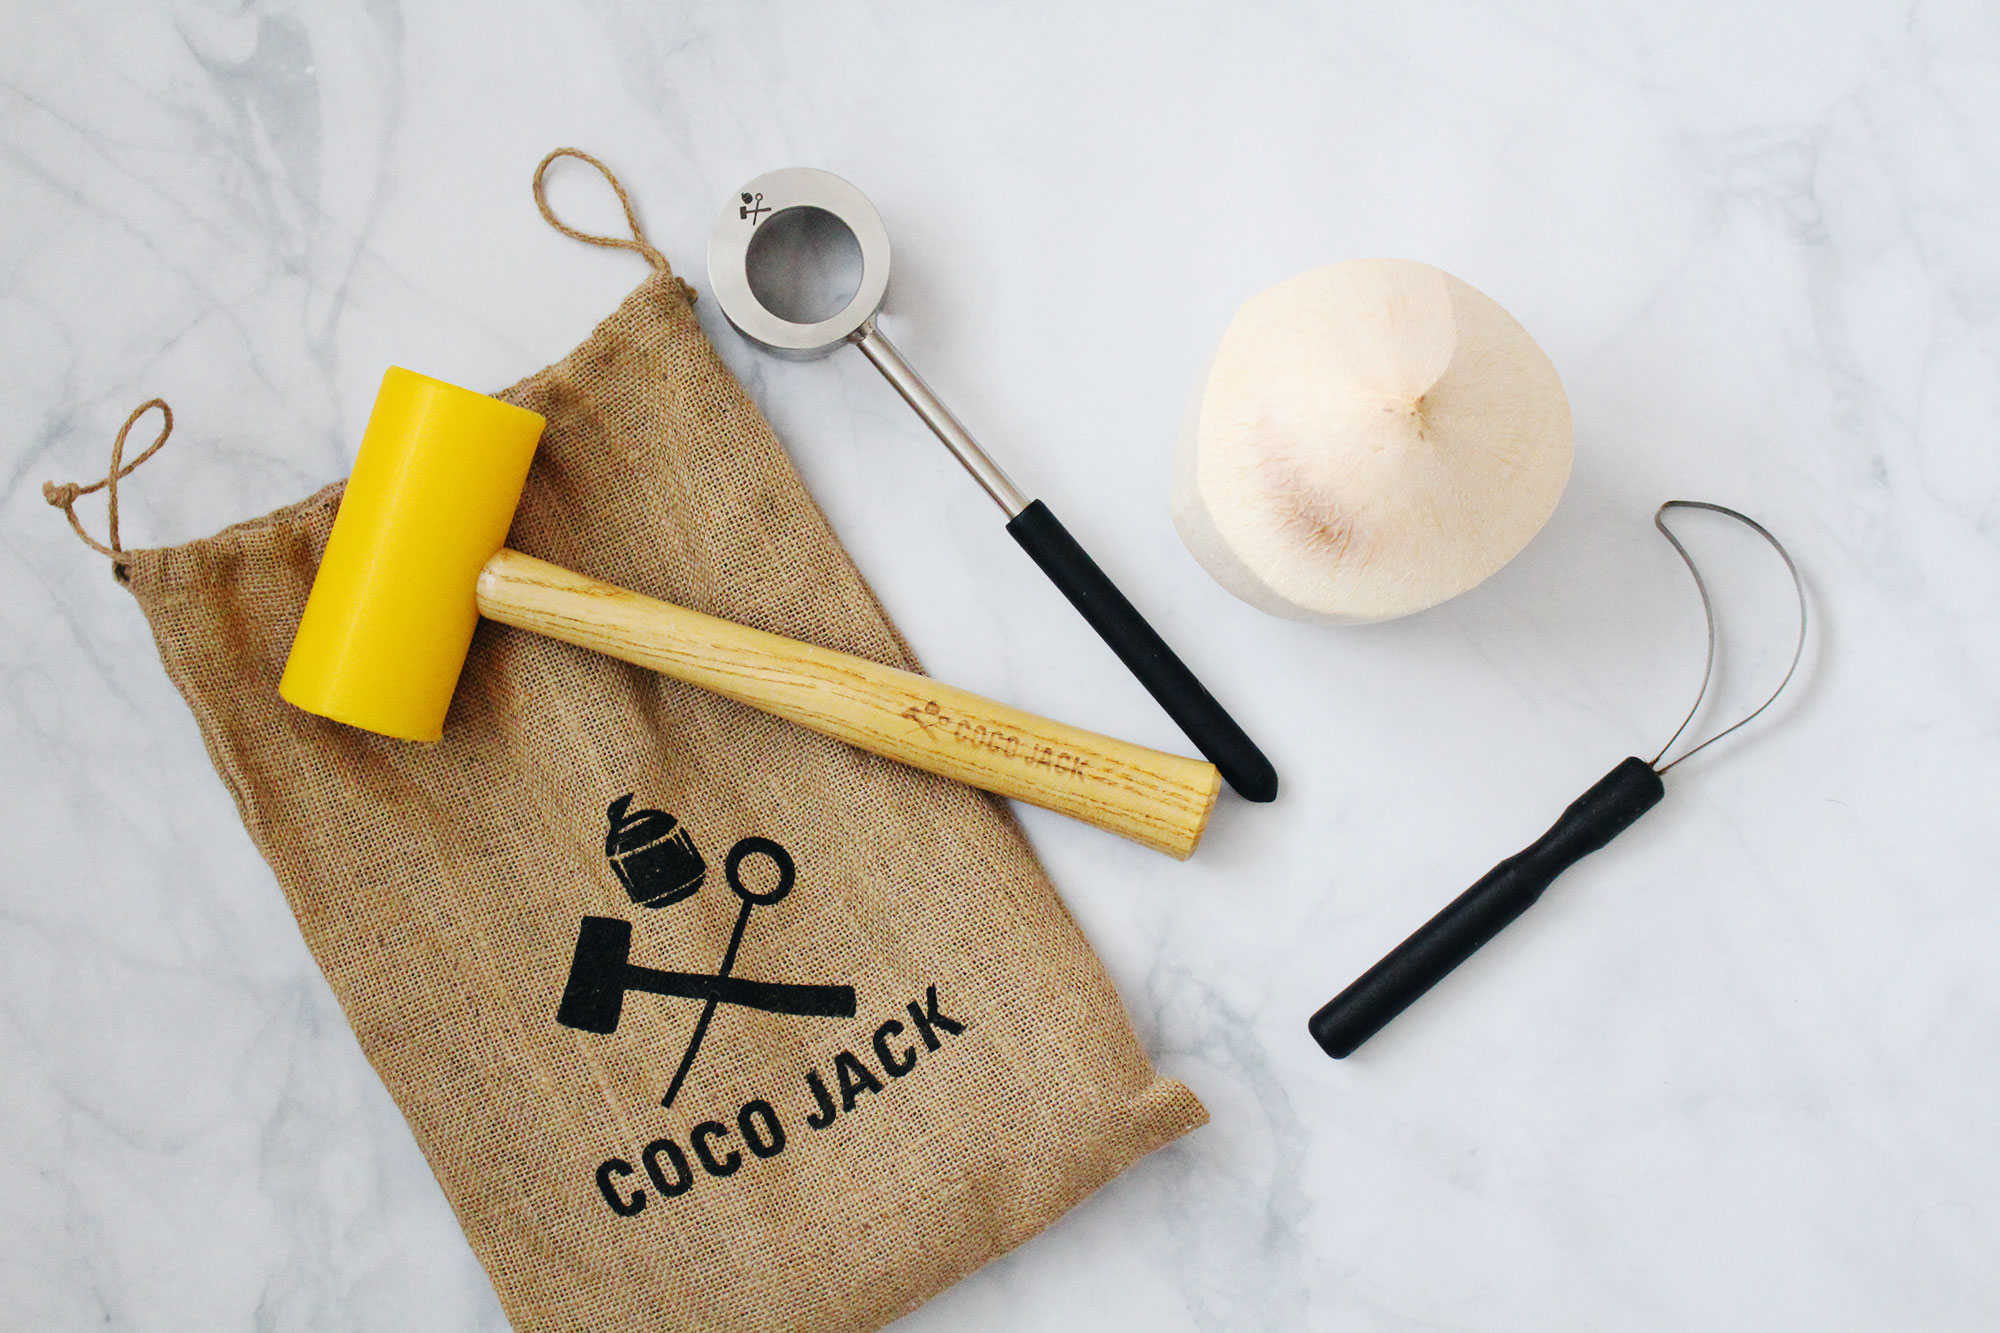 No need to be intimidated by opening a young coconut! Coco Jack (as seen on Shark Tank) is the best tool and makes it a breeze.